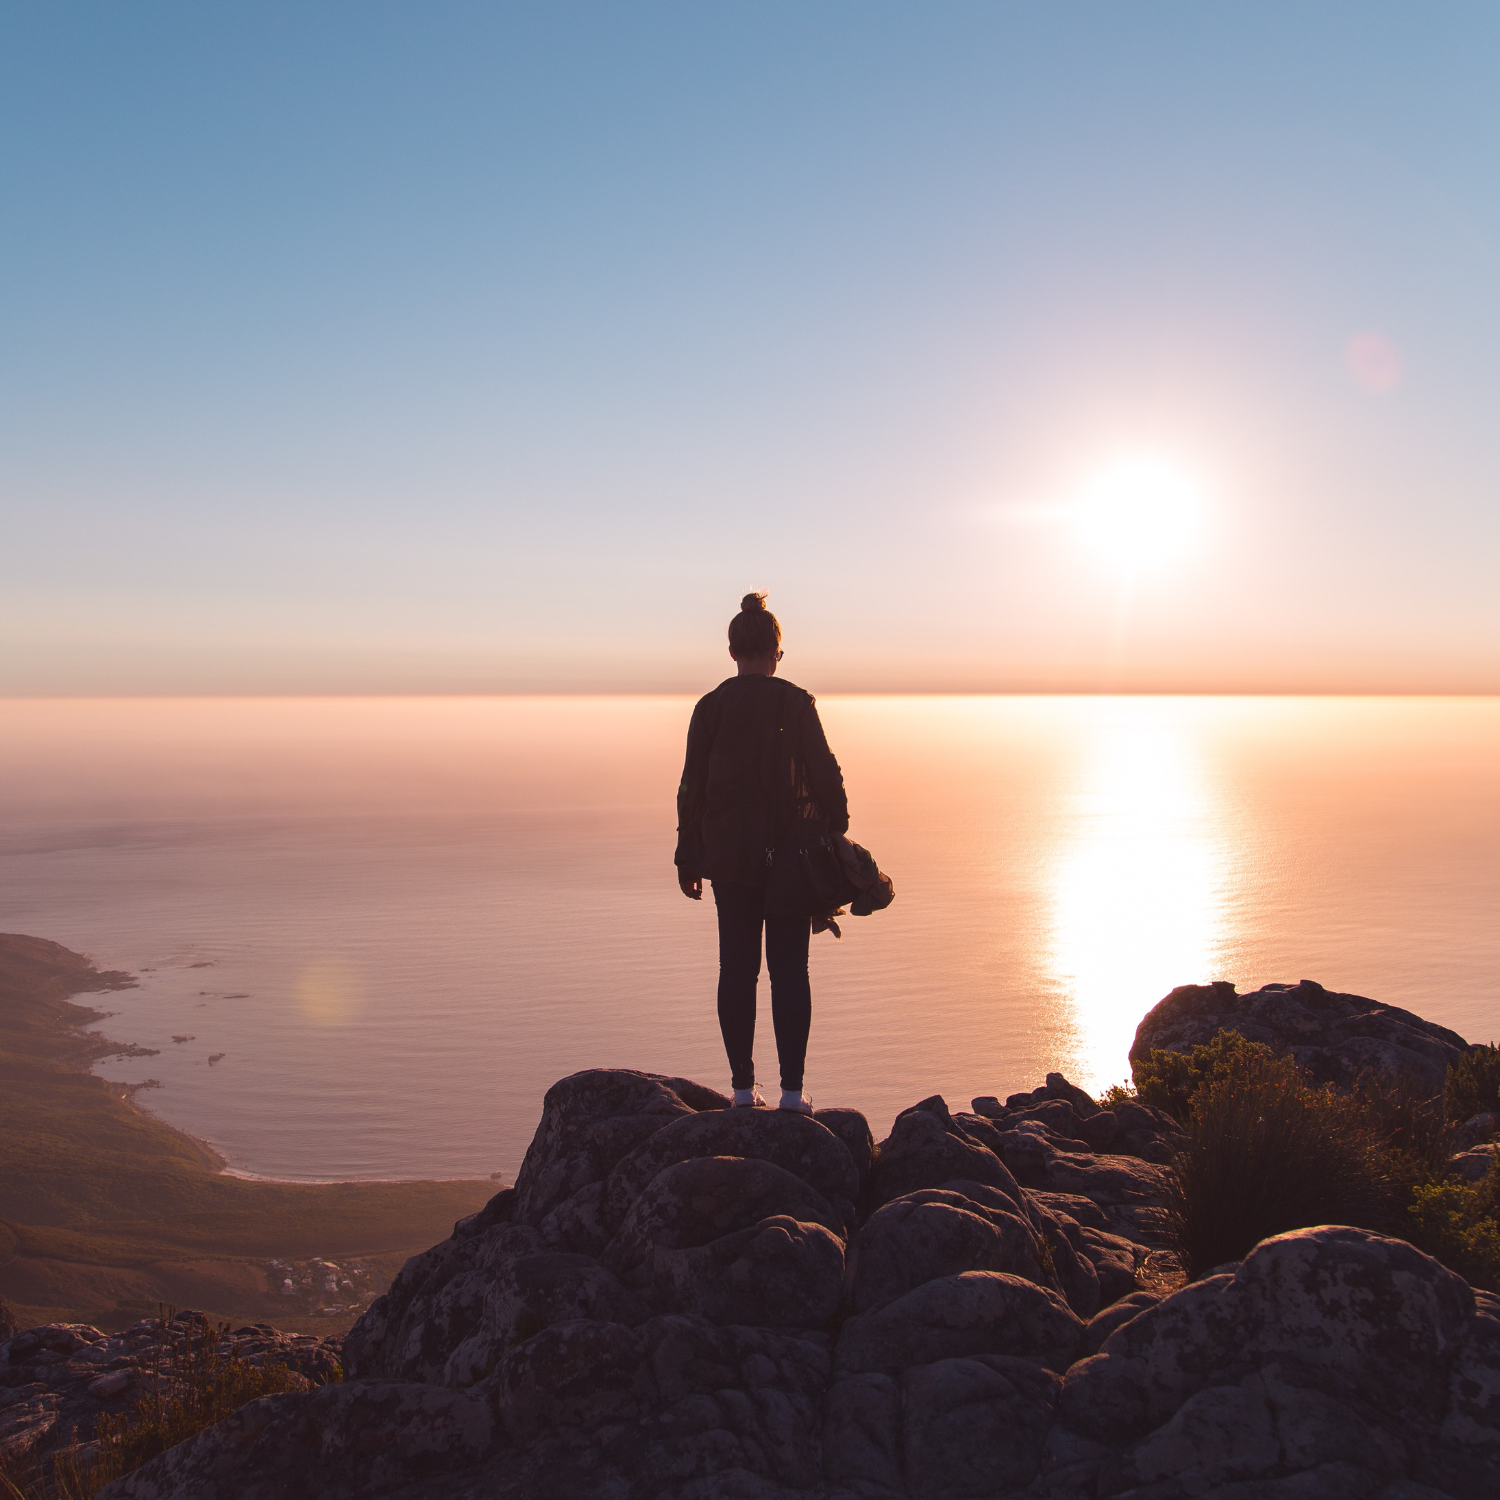 Pacific Harvest nutritionally complete lady looking out to sunrise on top of mountain